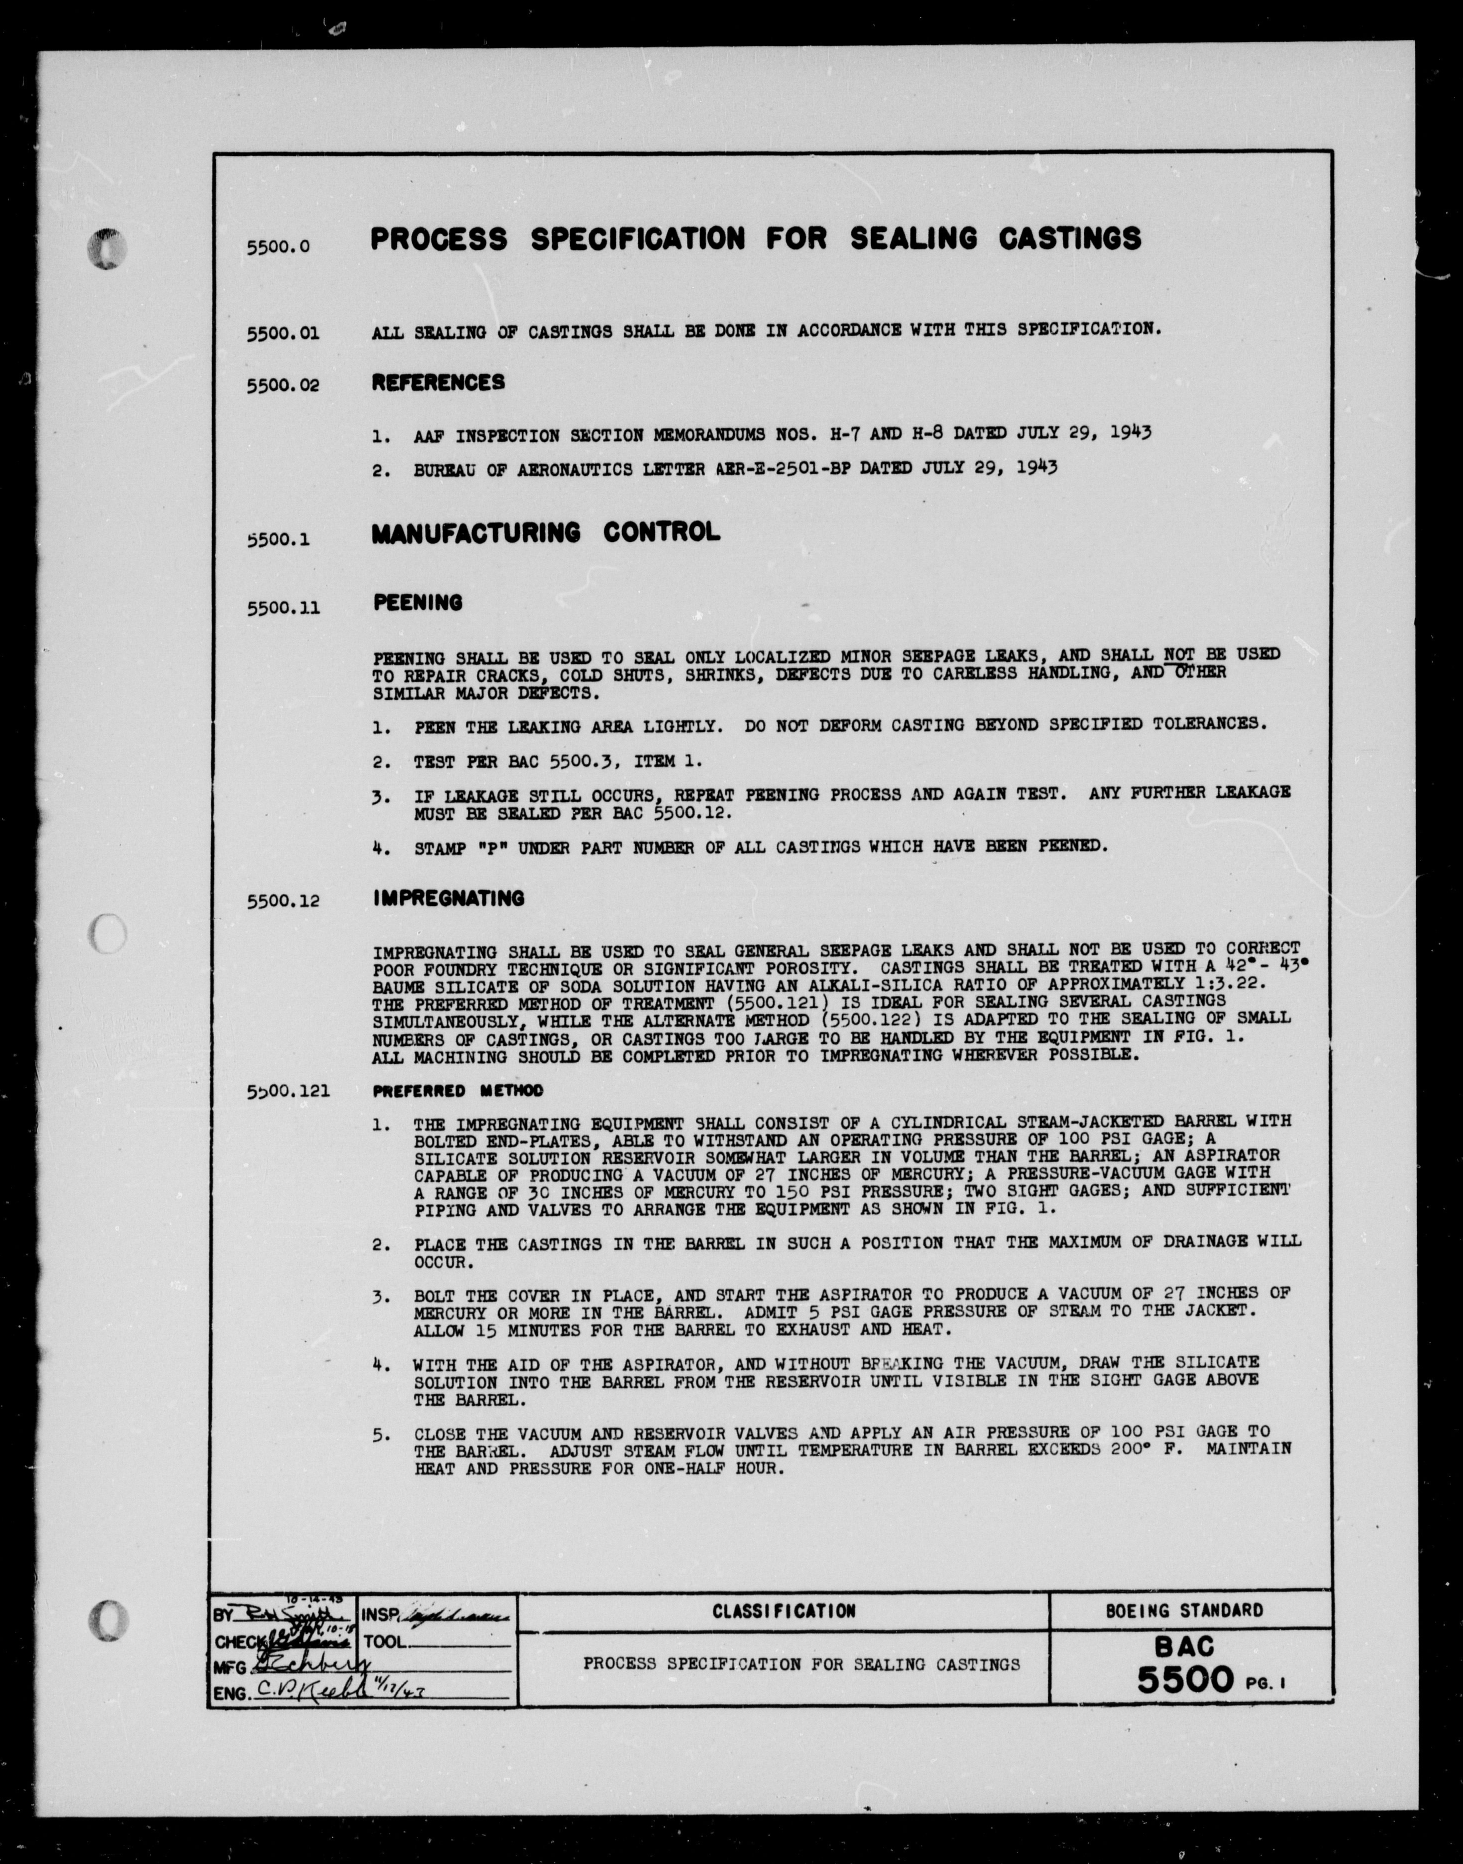 Sample page 1 from AirCorps Library document: Process Specification for Sealing Castings